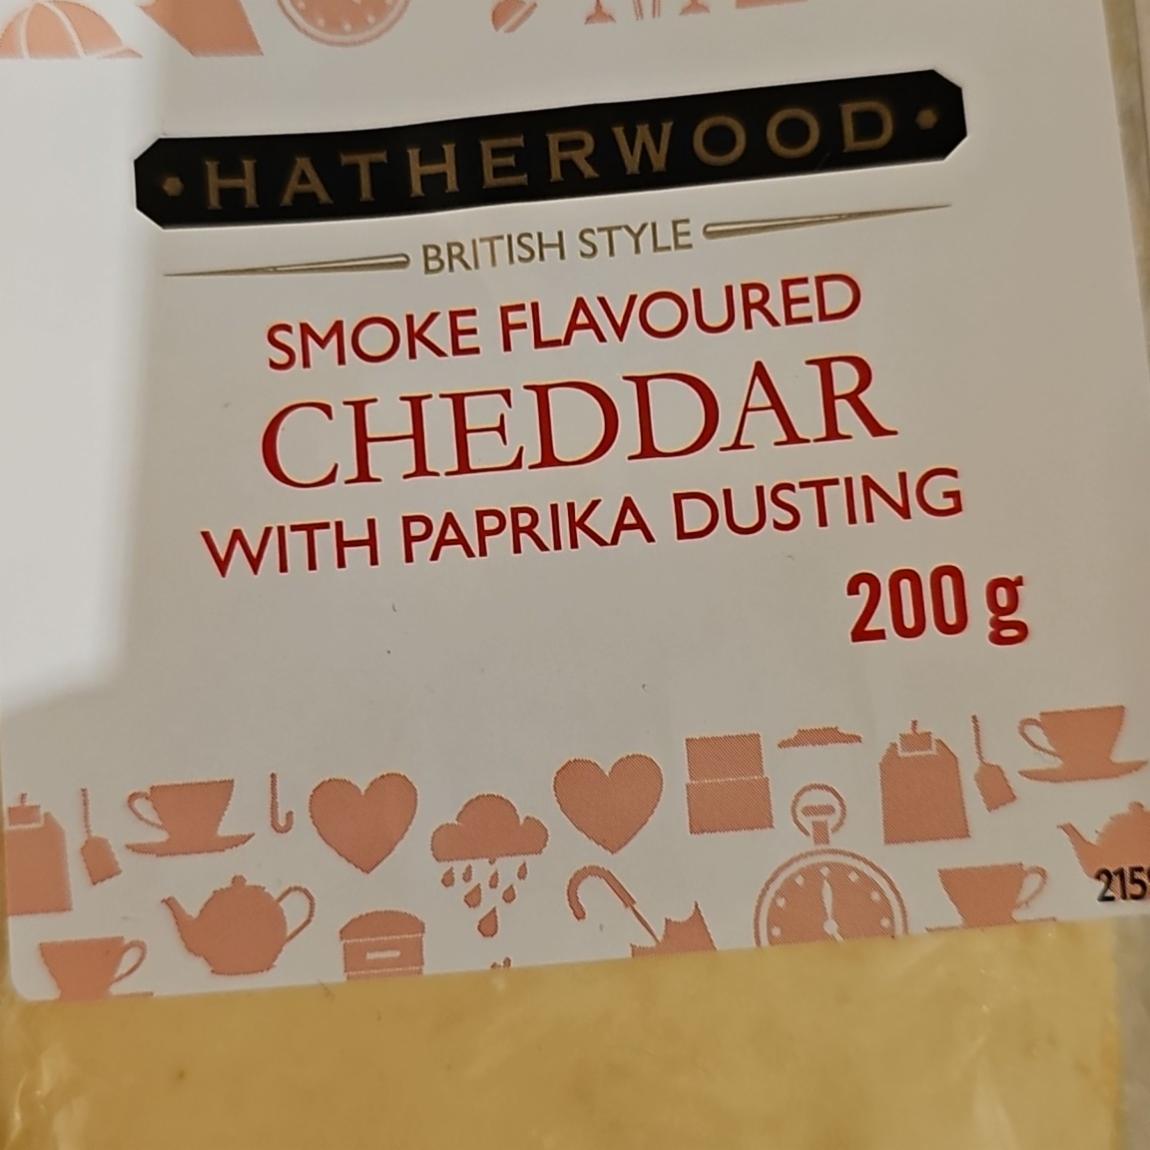 Fotografie - Cheddar smoked flavoured with paprika dusting Hatherwood